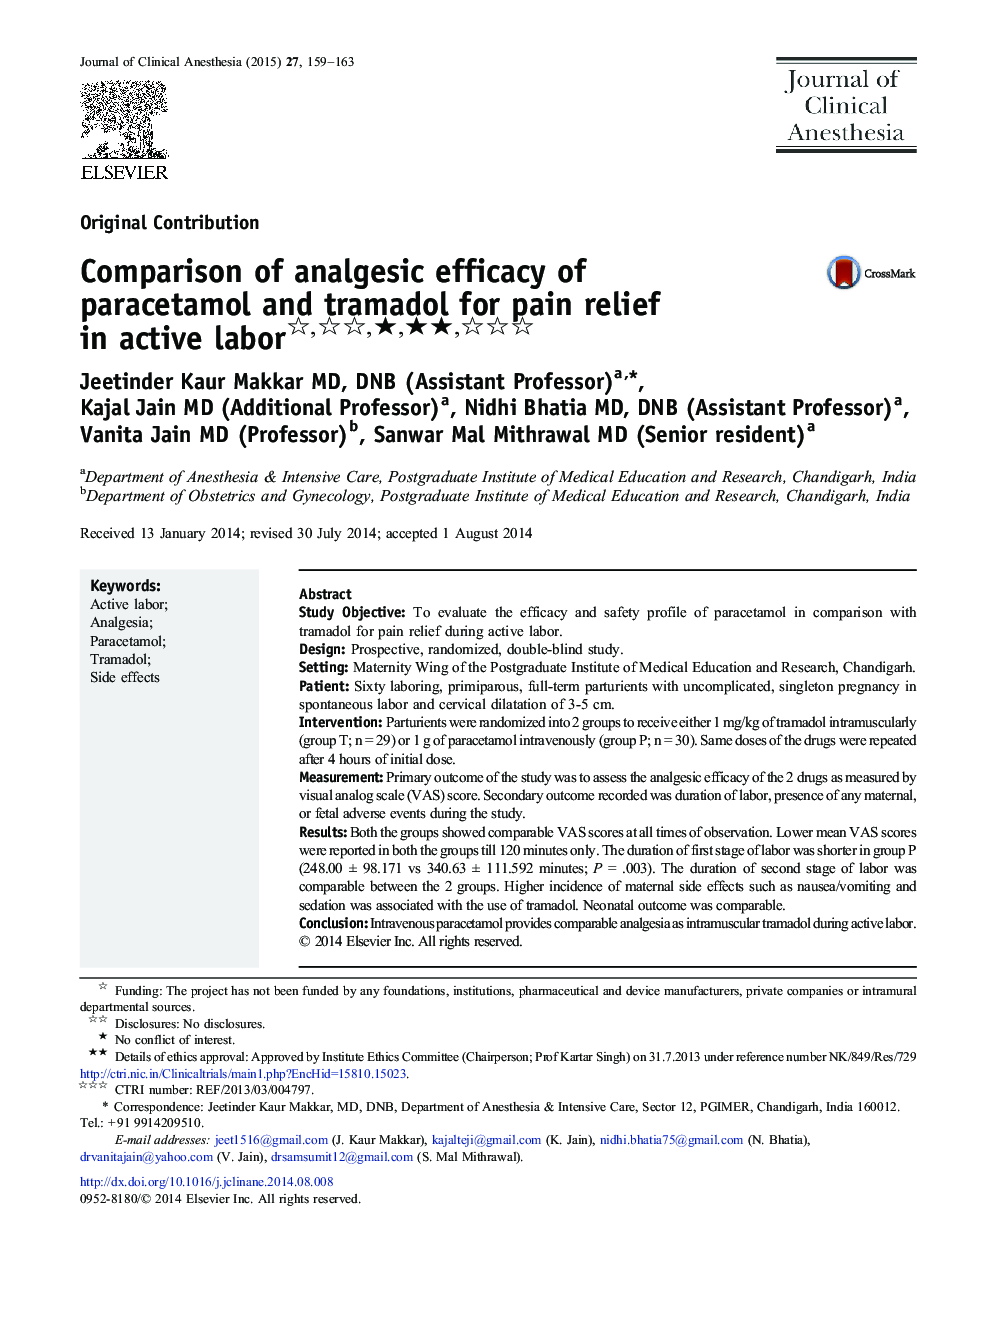 Comparison of analgesic efficacy of paracetamol and tramadol for pain relief in active labor ★★★